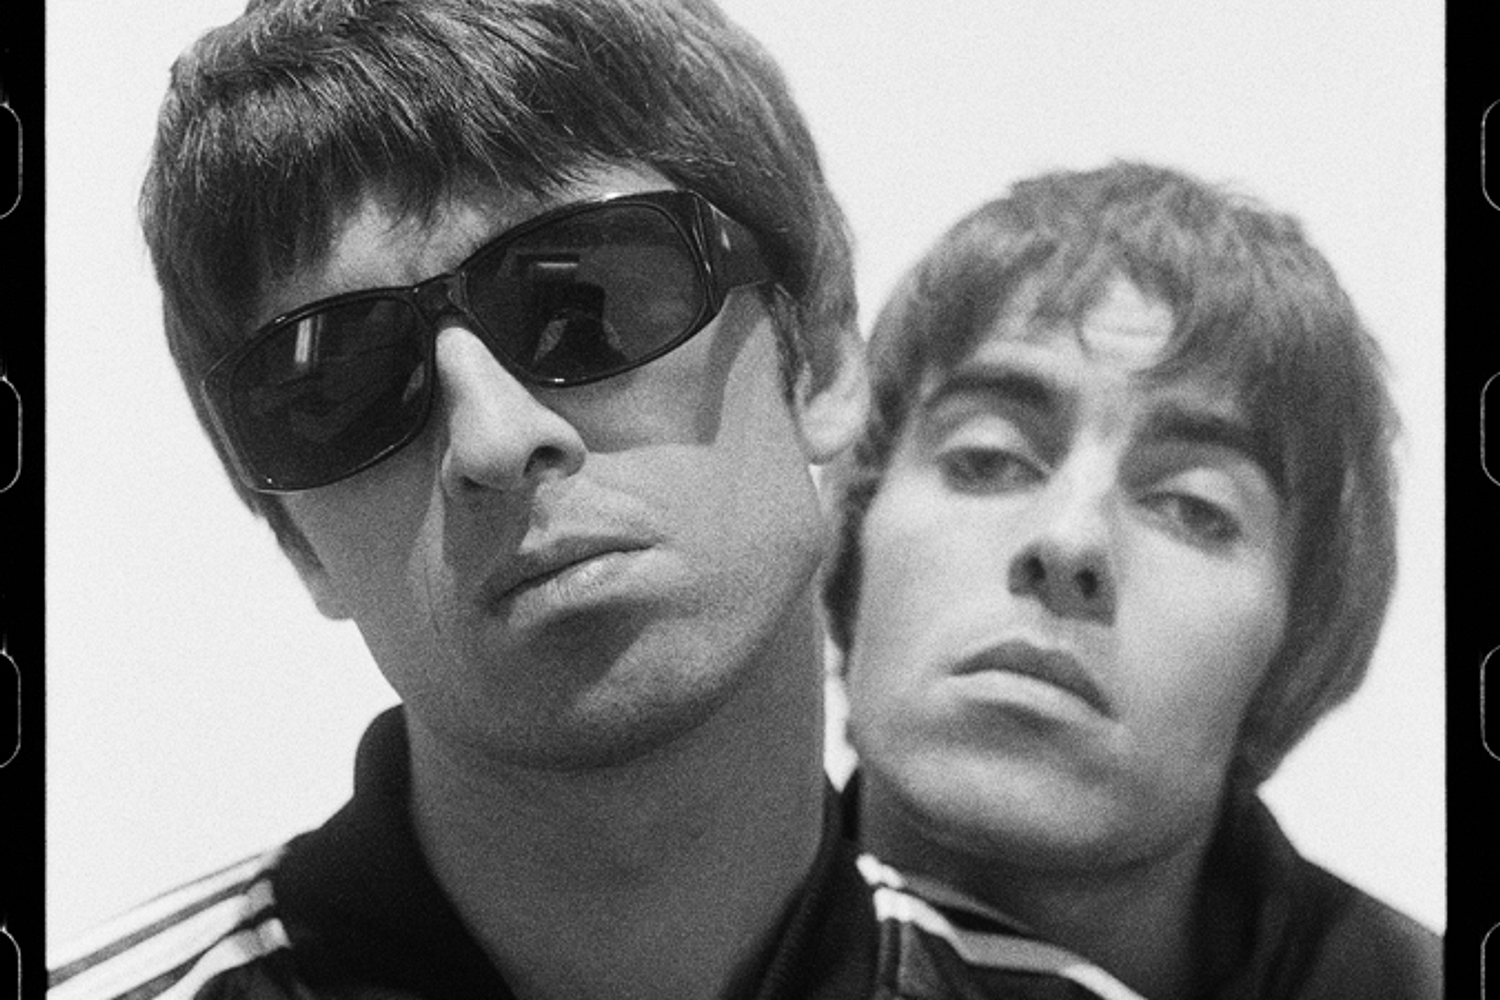 Oasis announce ‘Definitely Maybe’ 30th anniversary reissue